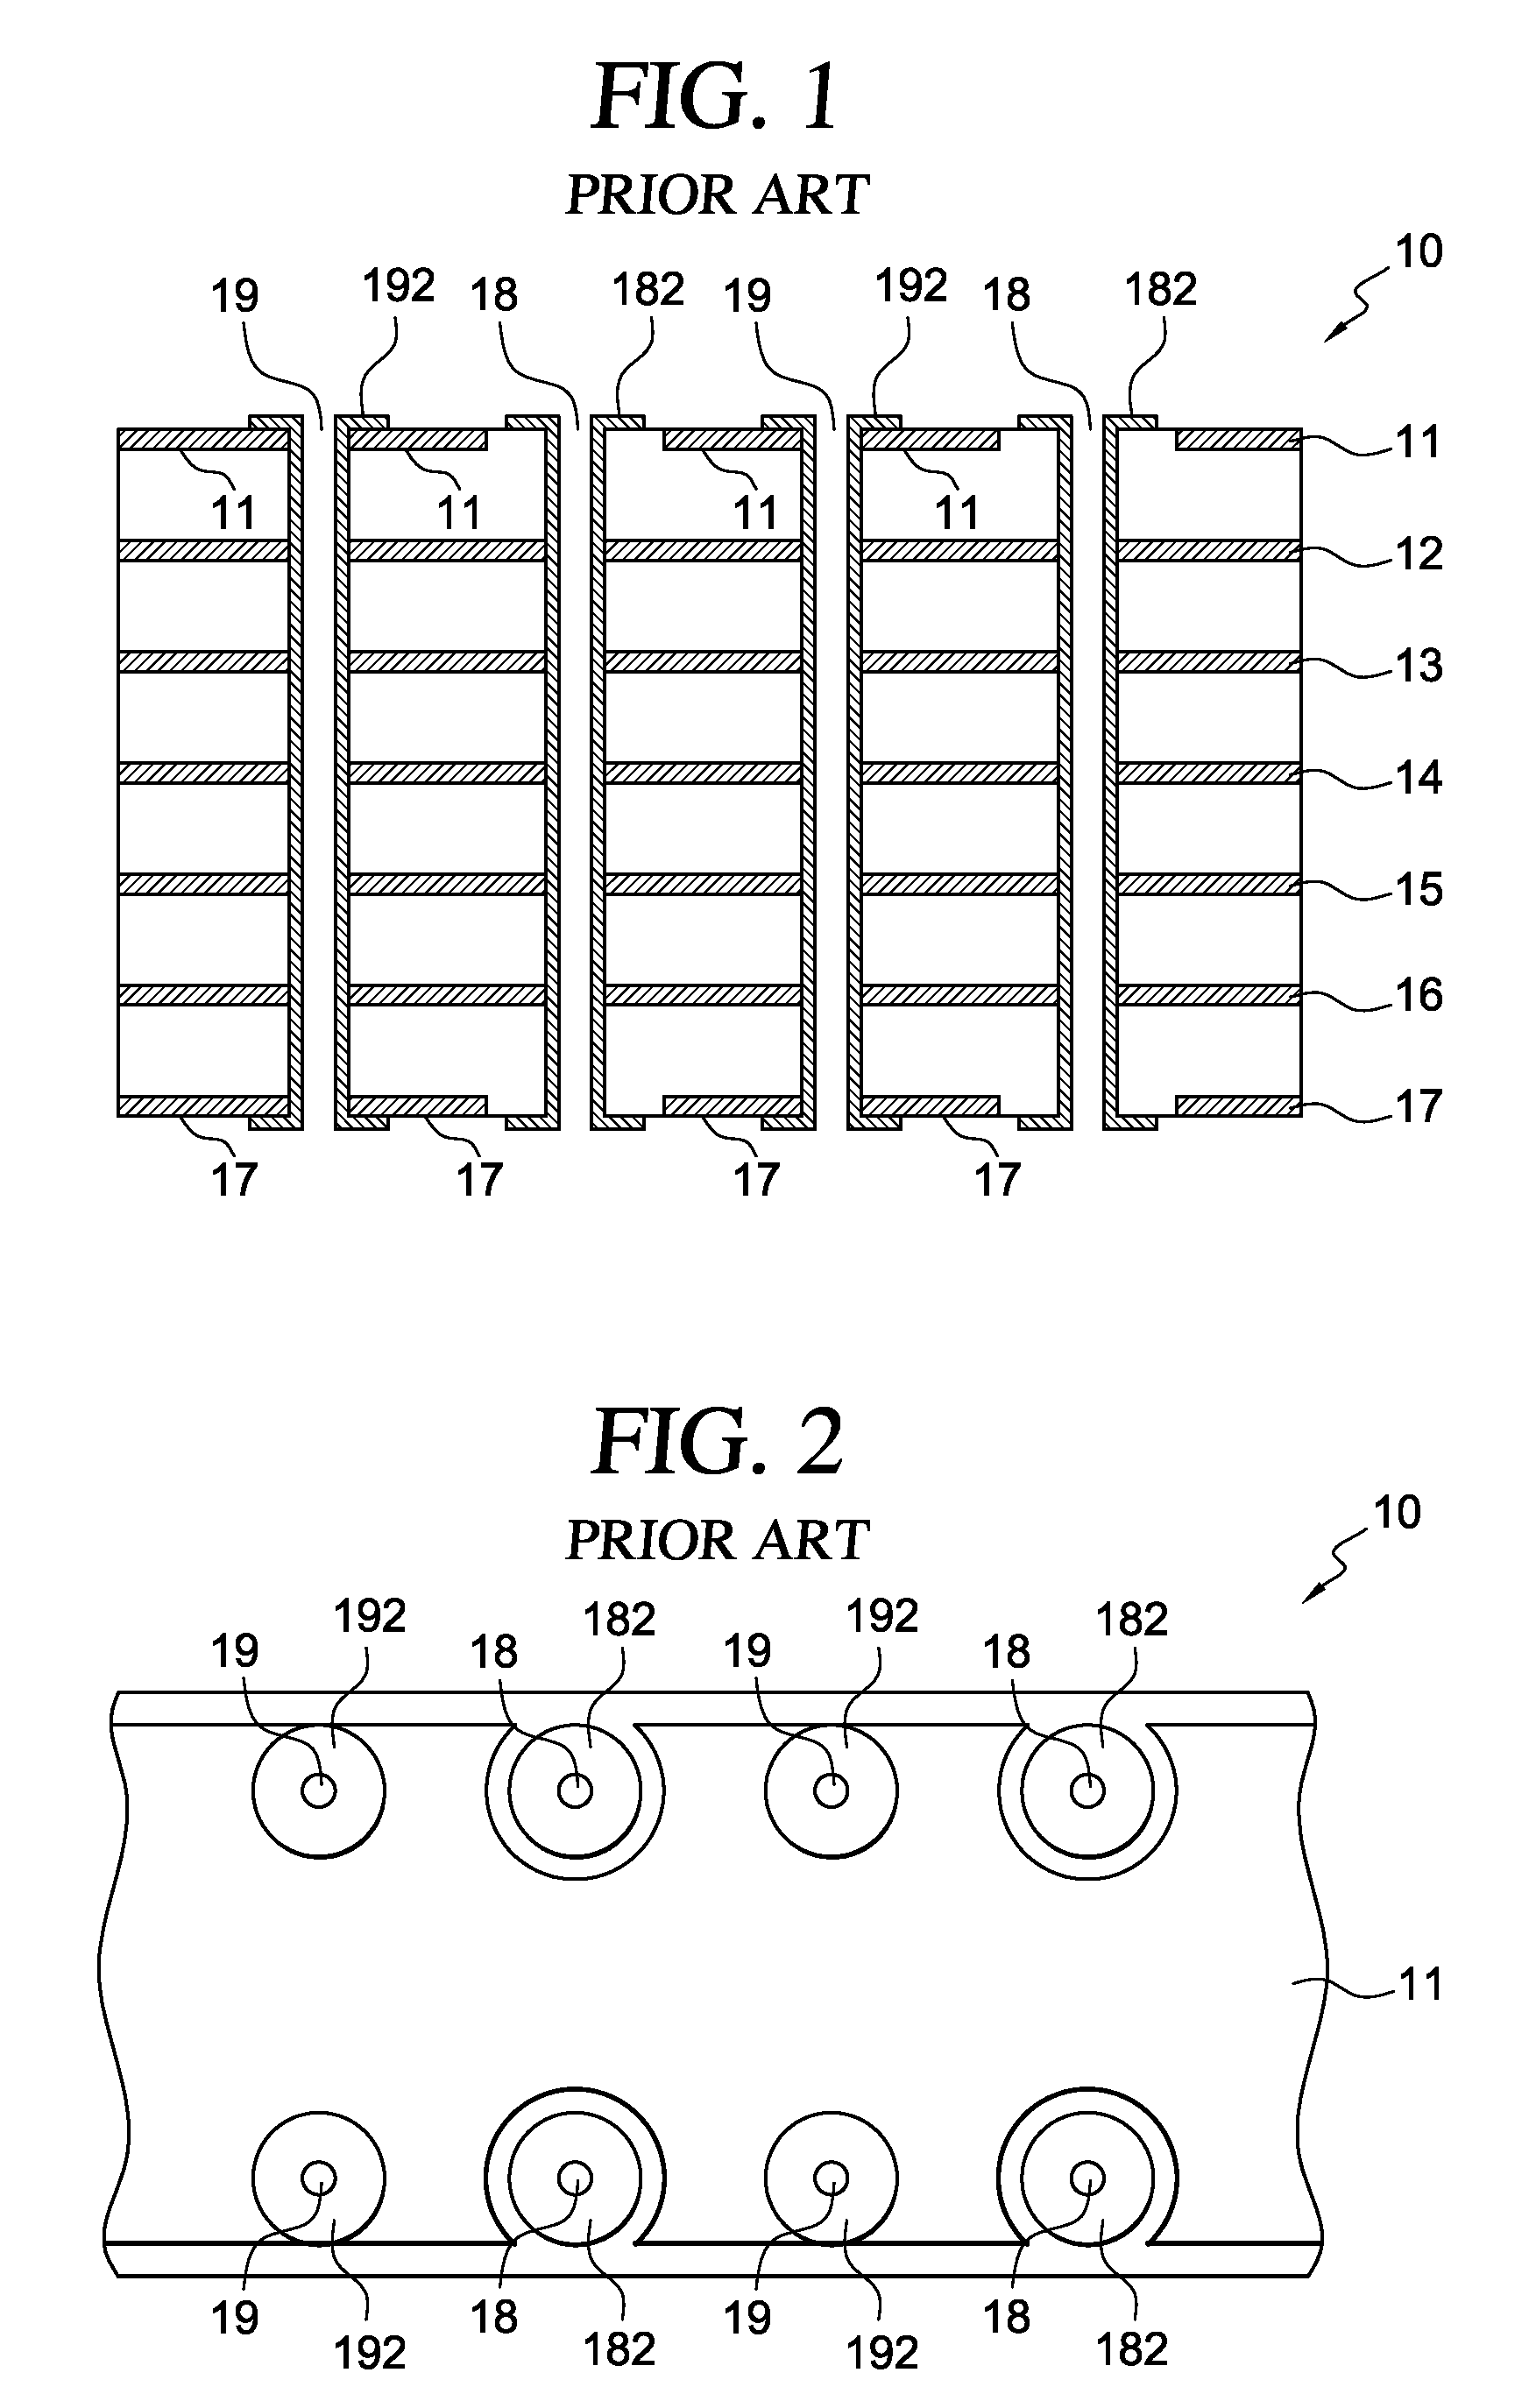 Flexible Multilayer Printed Circuit Assembly with Reduced EMI Emissions